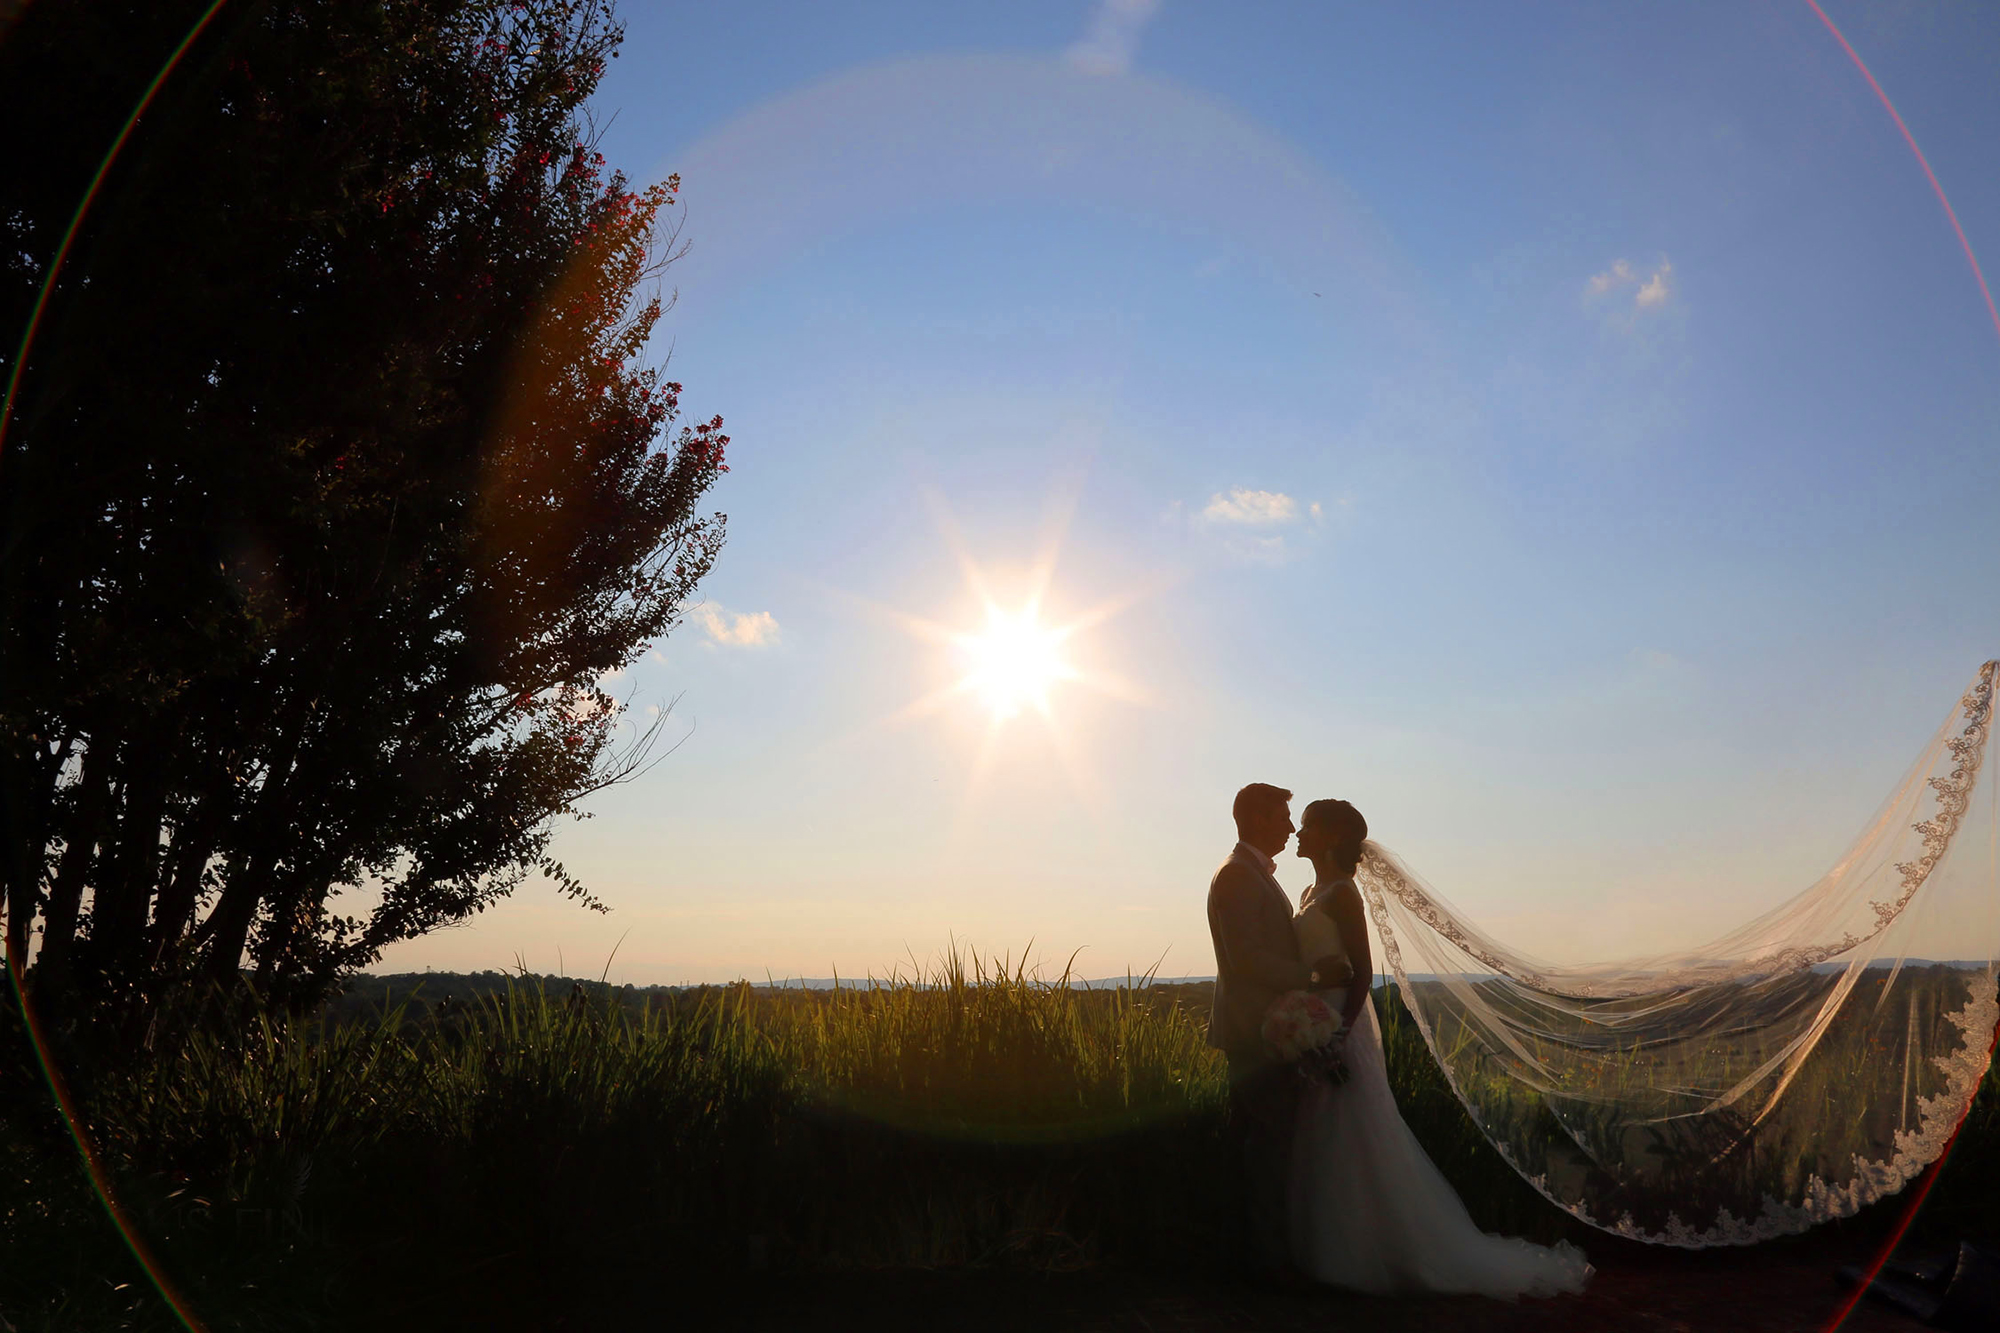 A couple stands together, smiling, in front of a radiant sun on their wedding day.